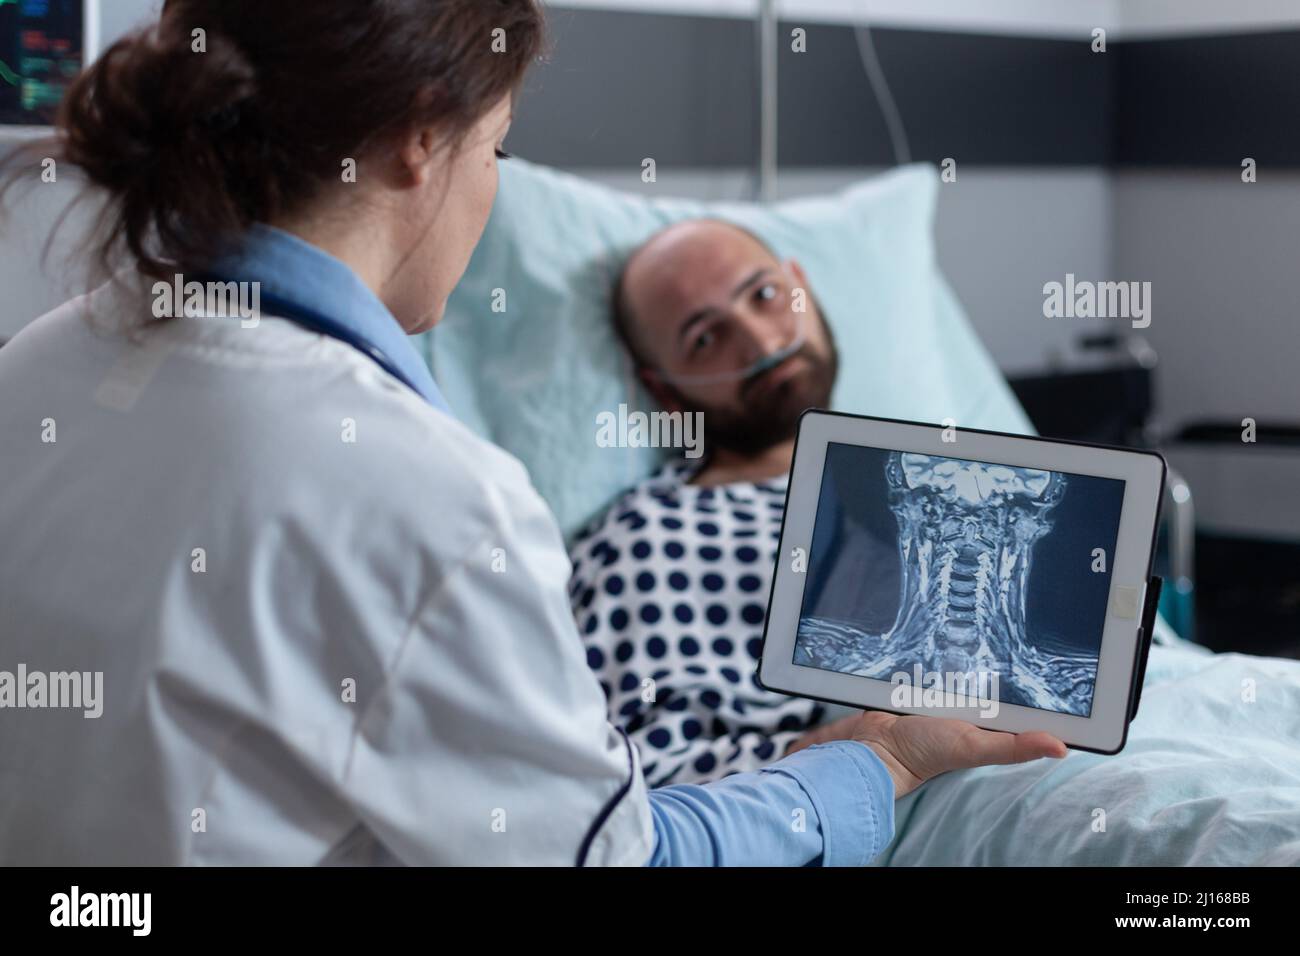 Medical doctor presenting options to patient for treating throat affliction while looking at mri scan on digital tablet. Middle aged man with cervical issues having low oxygen saturation. Stock Photo